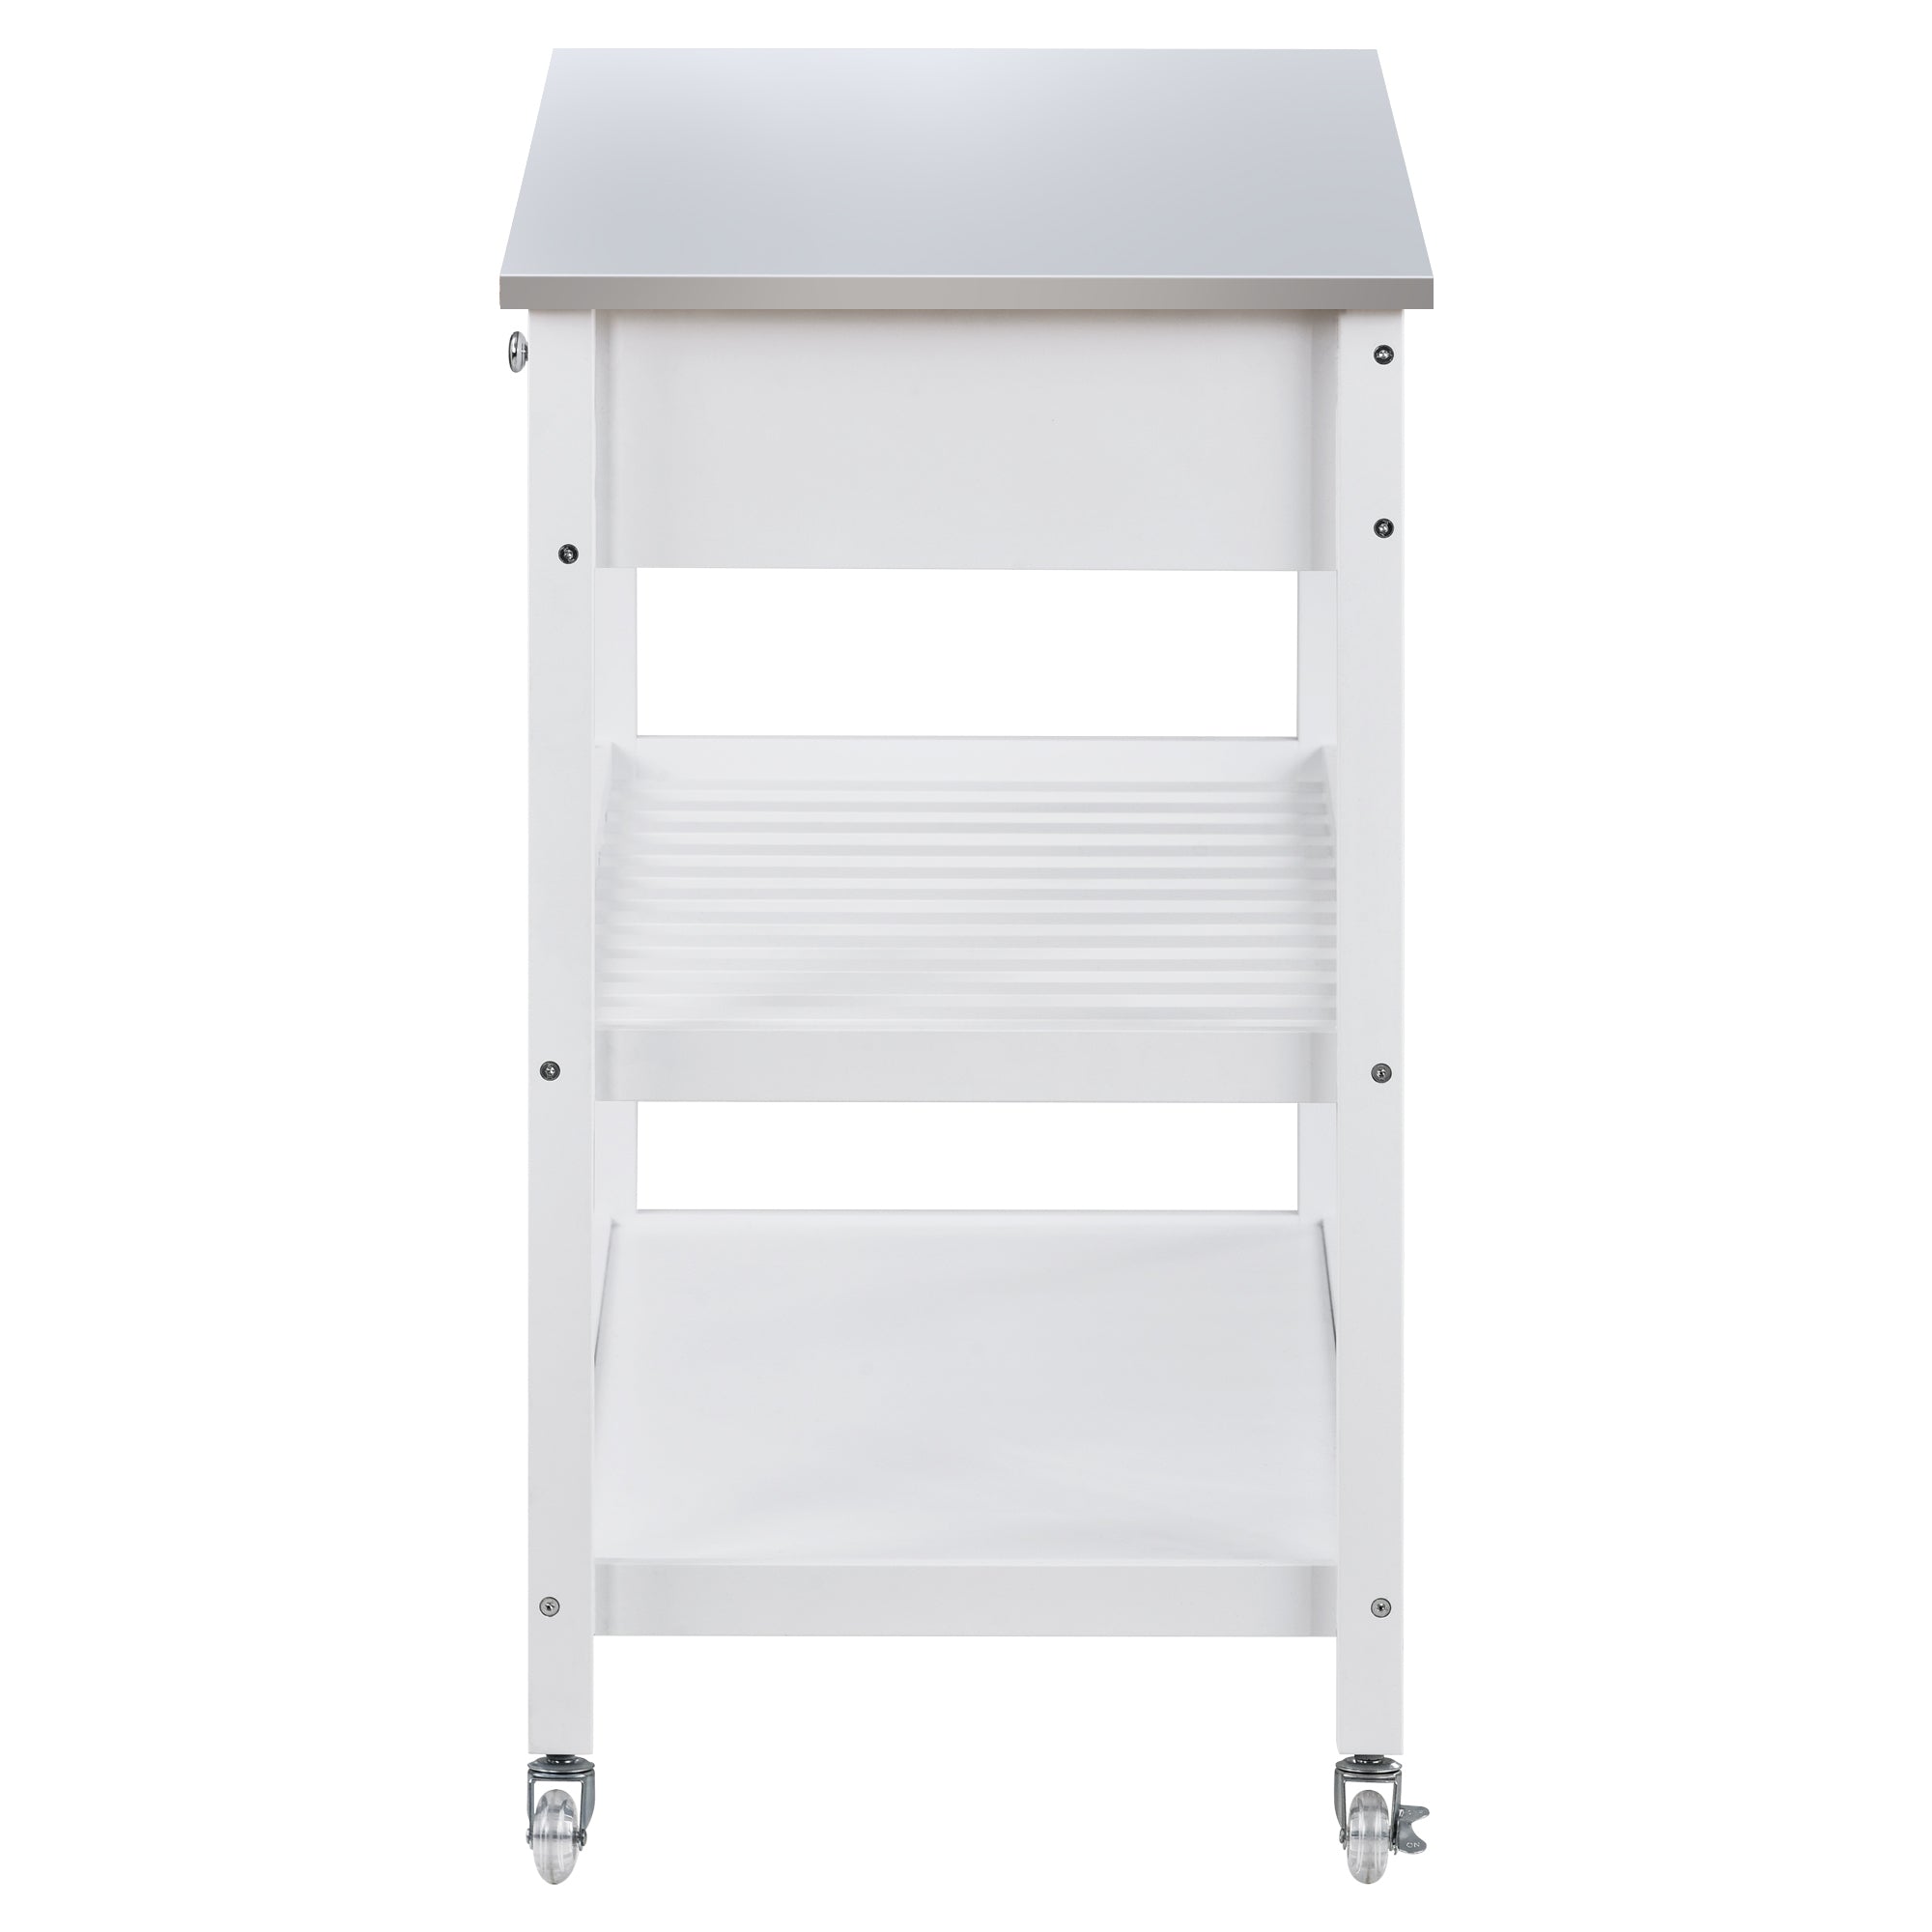 Rolling Kitchen Cart with Stainless Steel Top and Locking Wheels 43.3" Wide Bamboo Wood Frame (White)